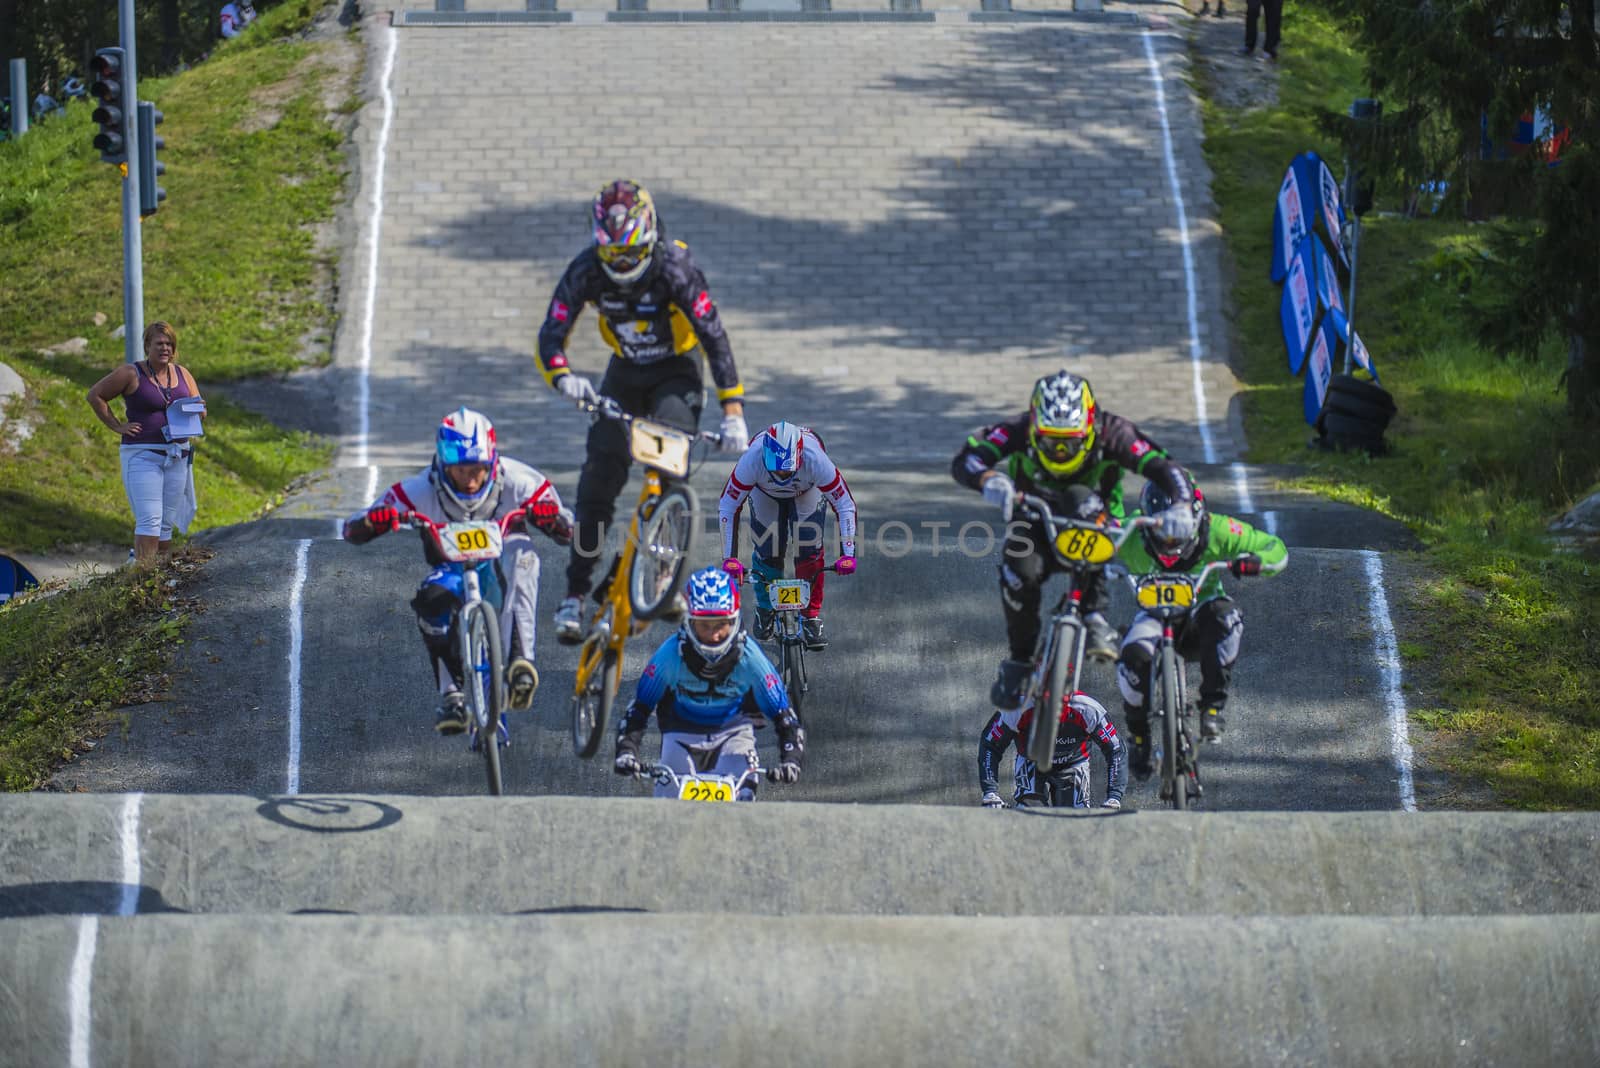 The fifth round of the Norway Cup in BMX was held in Raade (R��de), Norway.  The images are shot 24 August 2013.